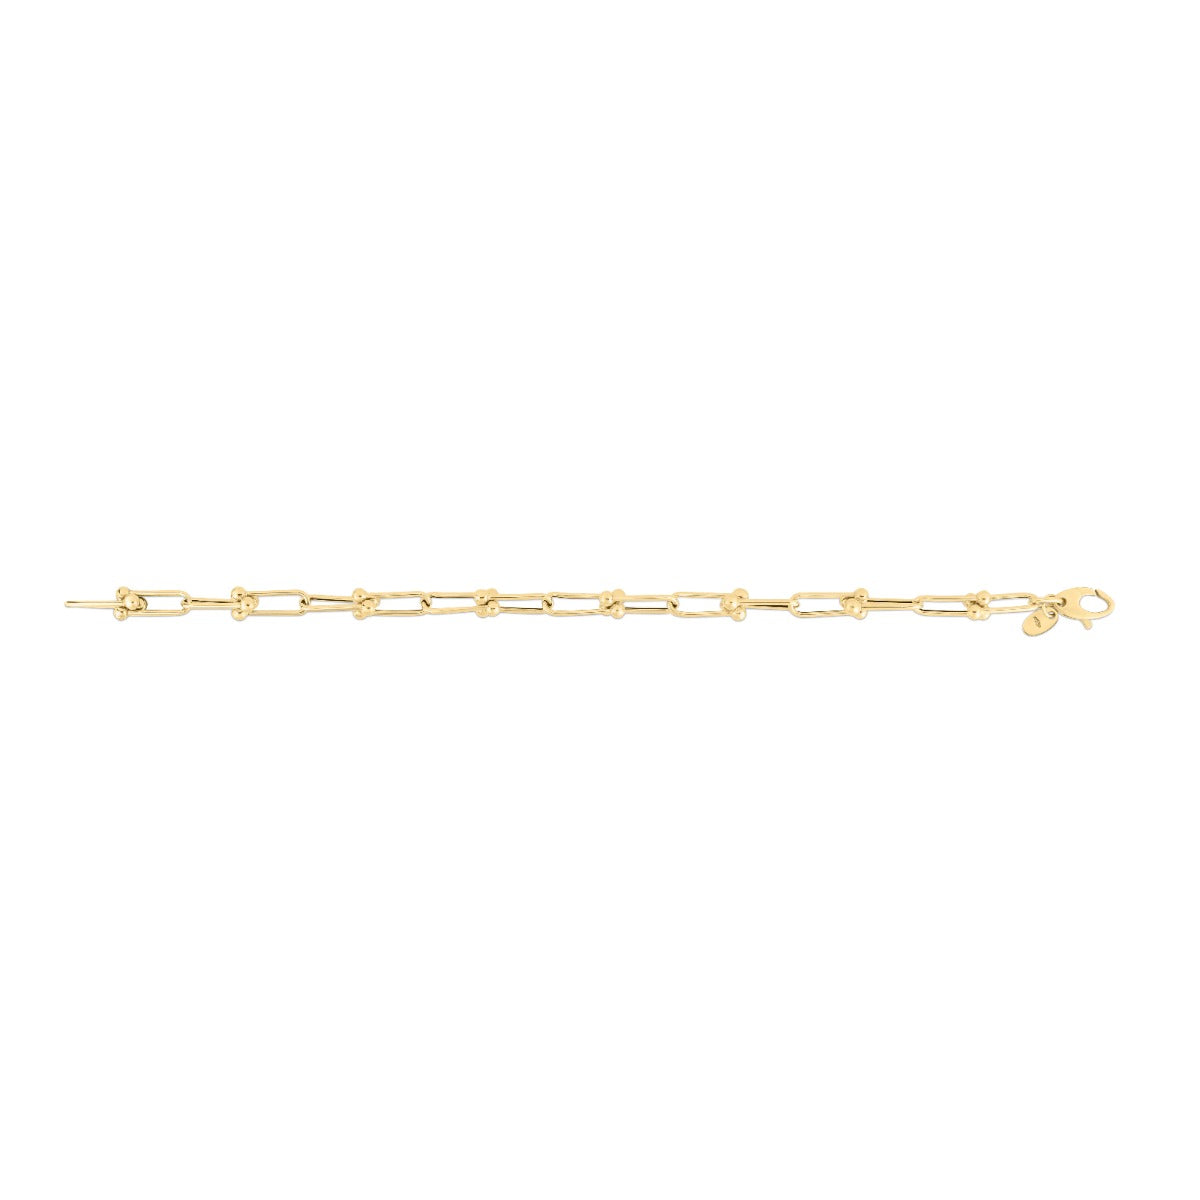 14K Gold Polished Jax Link Chain Chain with Lobster Clasp.